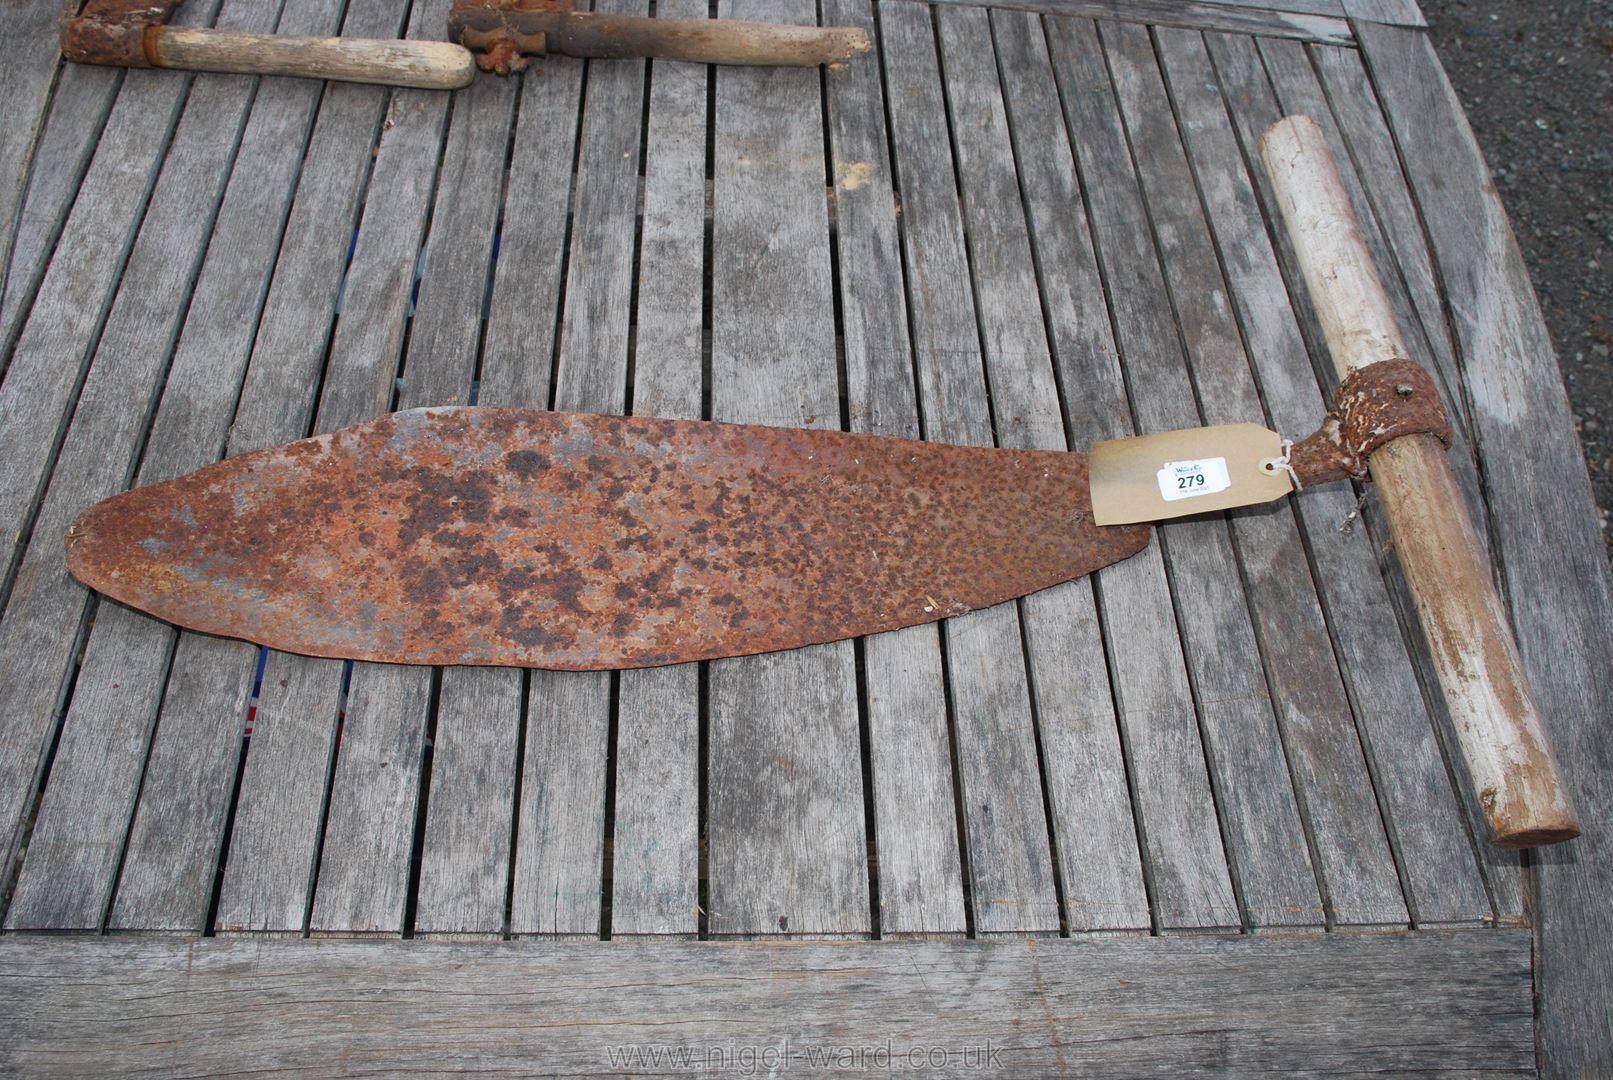 A hay/silage knife.